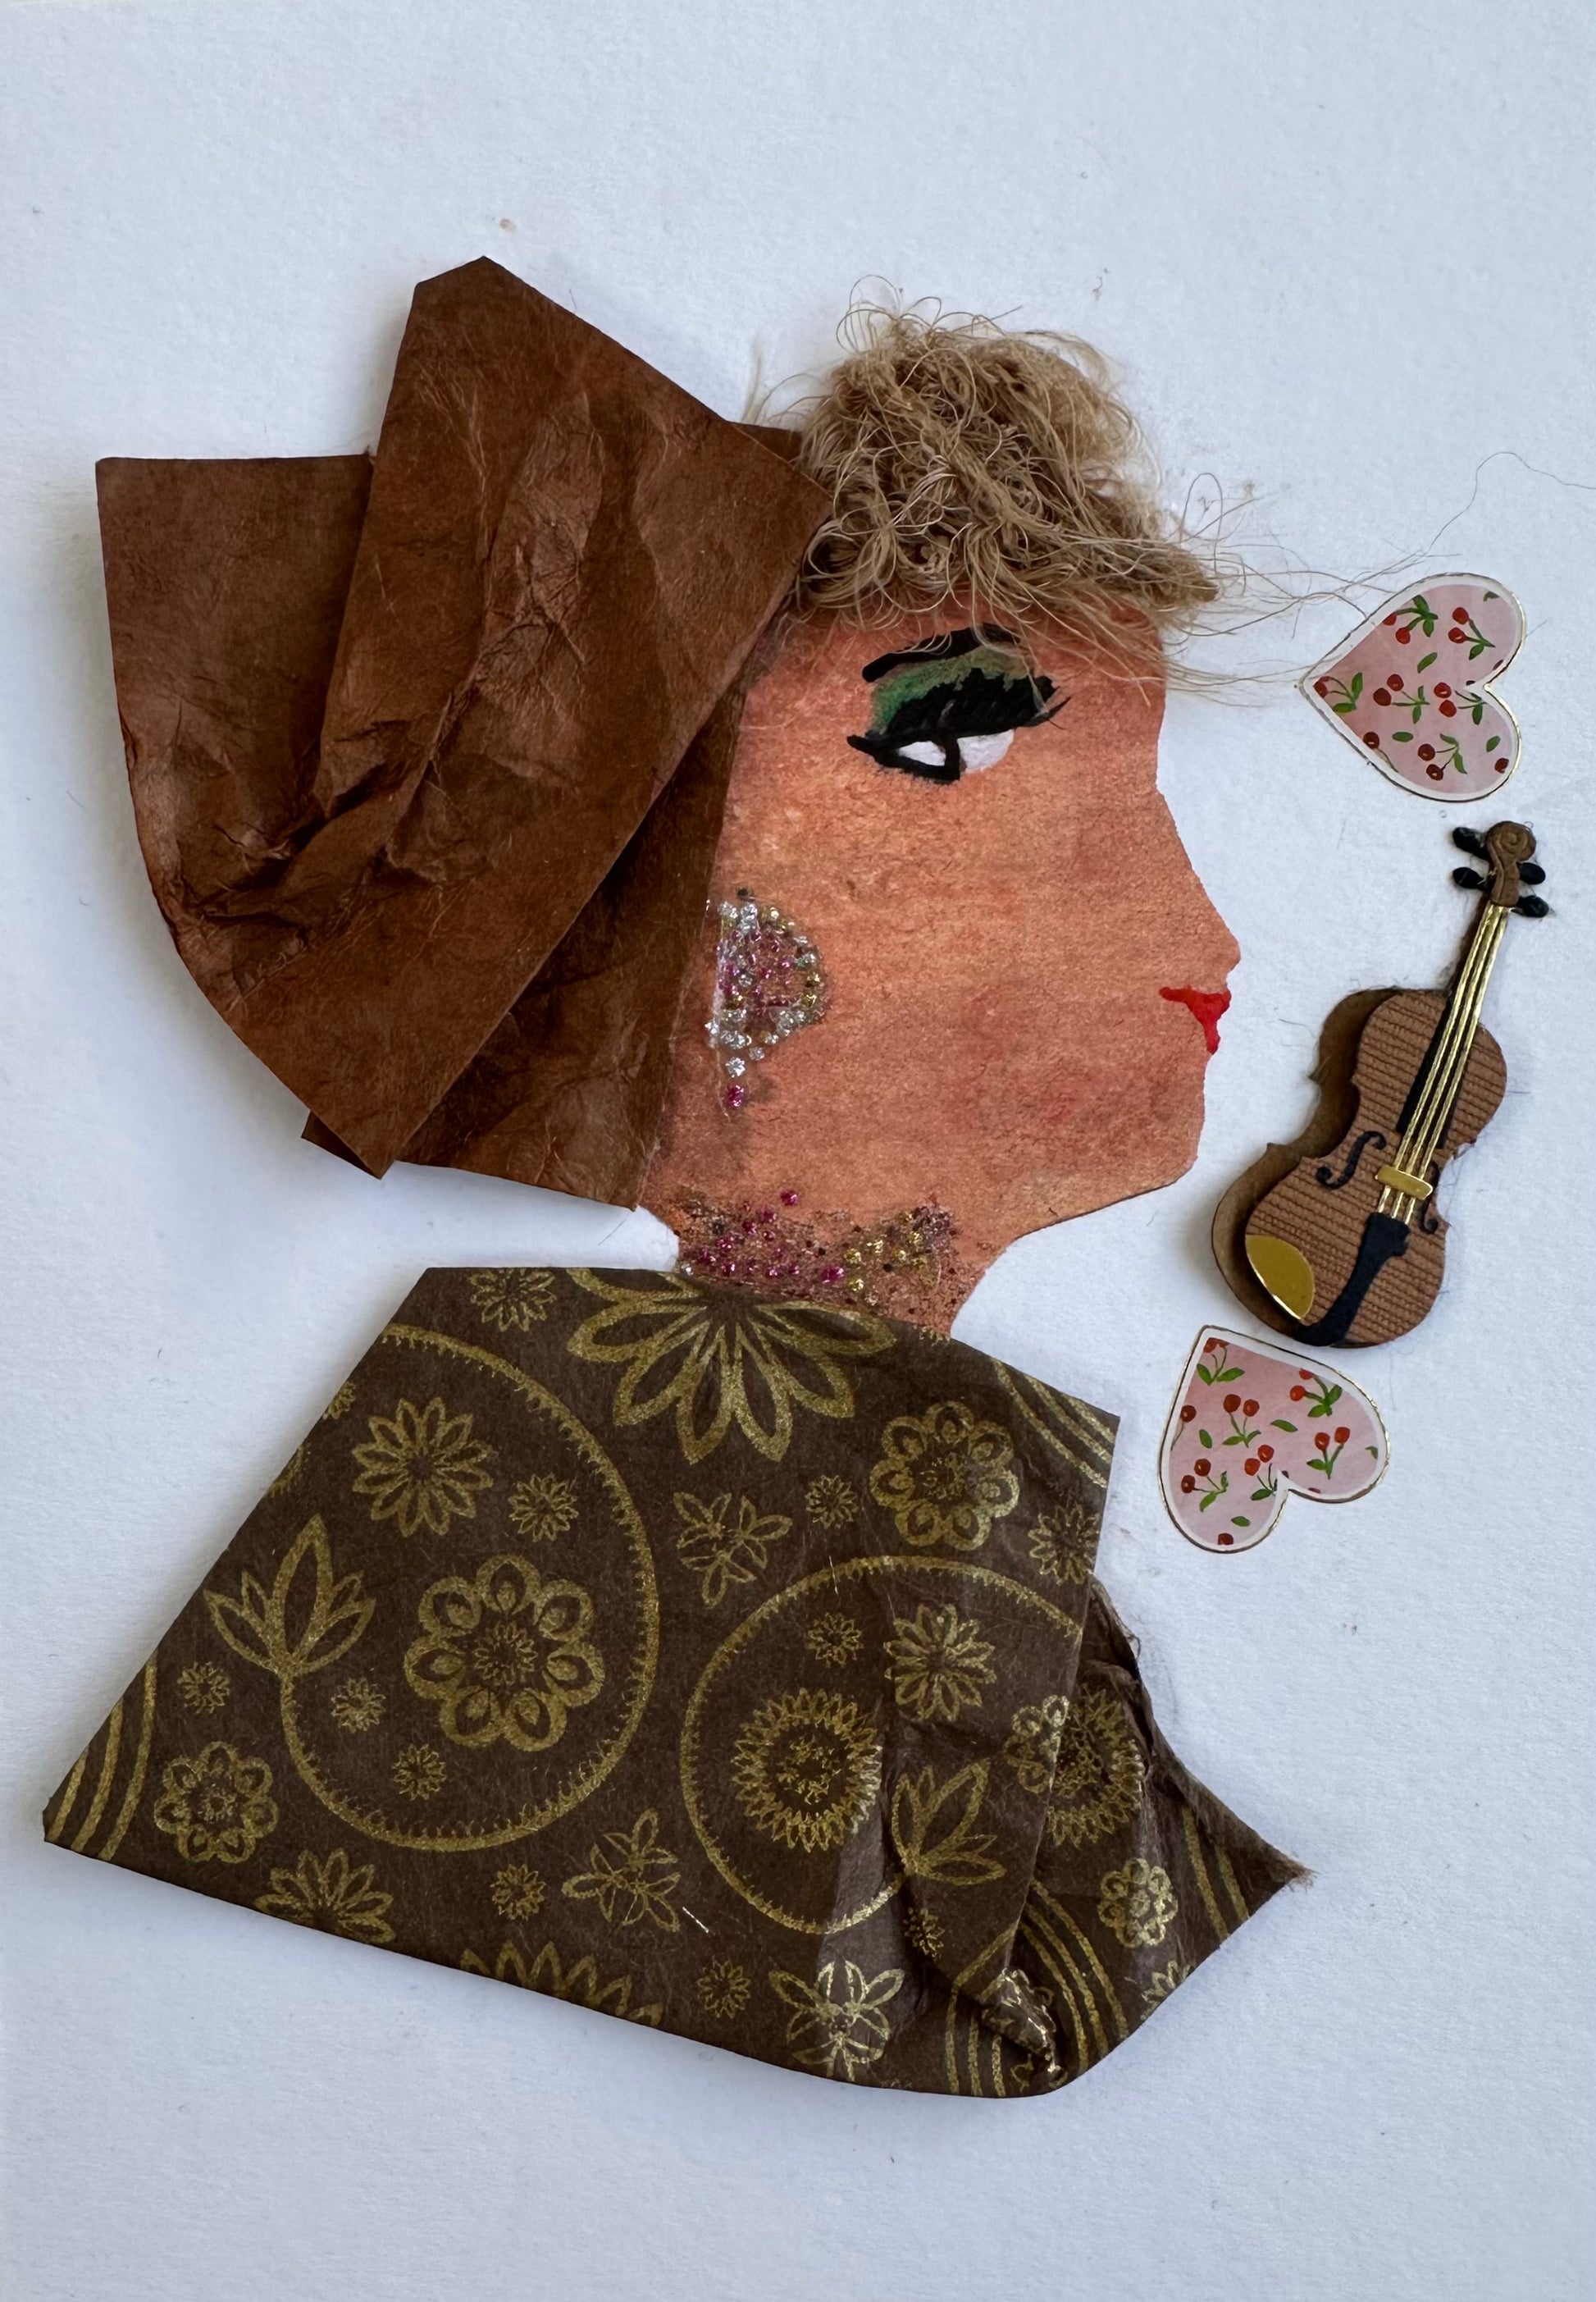 I designed this handmade card of a woman dressed in a brown blouse with a gold coloured flowers and designs painted on it. Her hatinator is a lighter brown, and she is wearing pink and silver gemstones jewellery. Next to her face is a violin and two pink hearts with small cherries patterned inside.